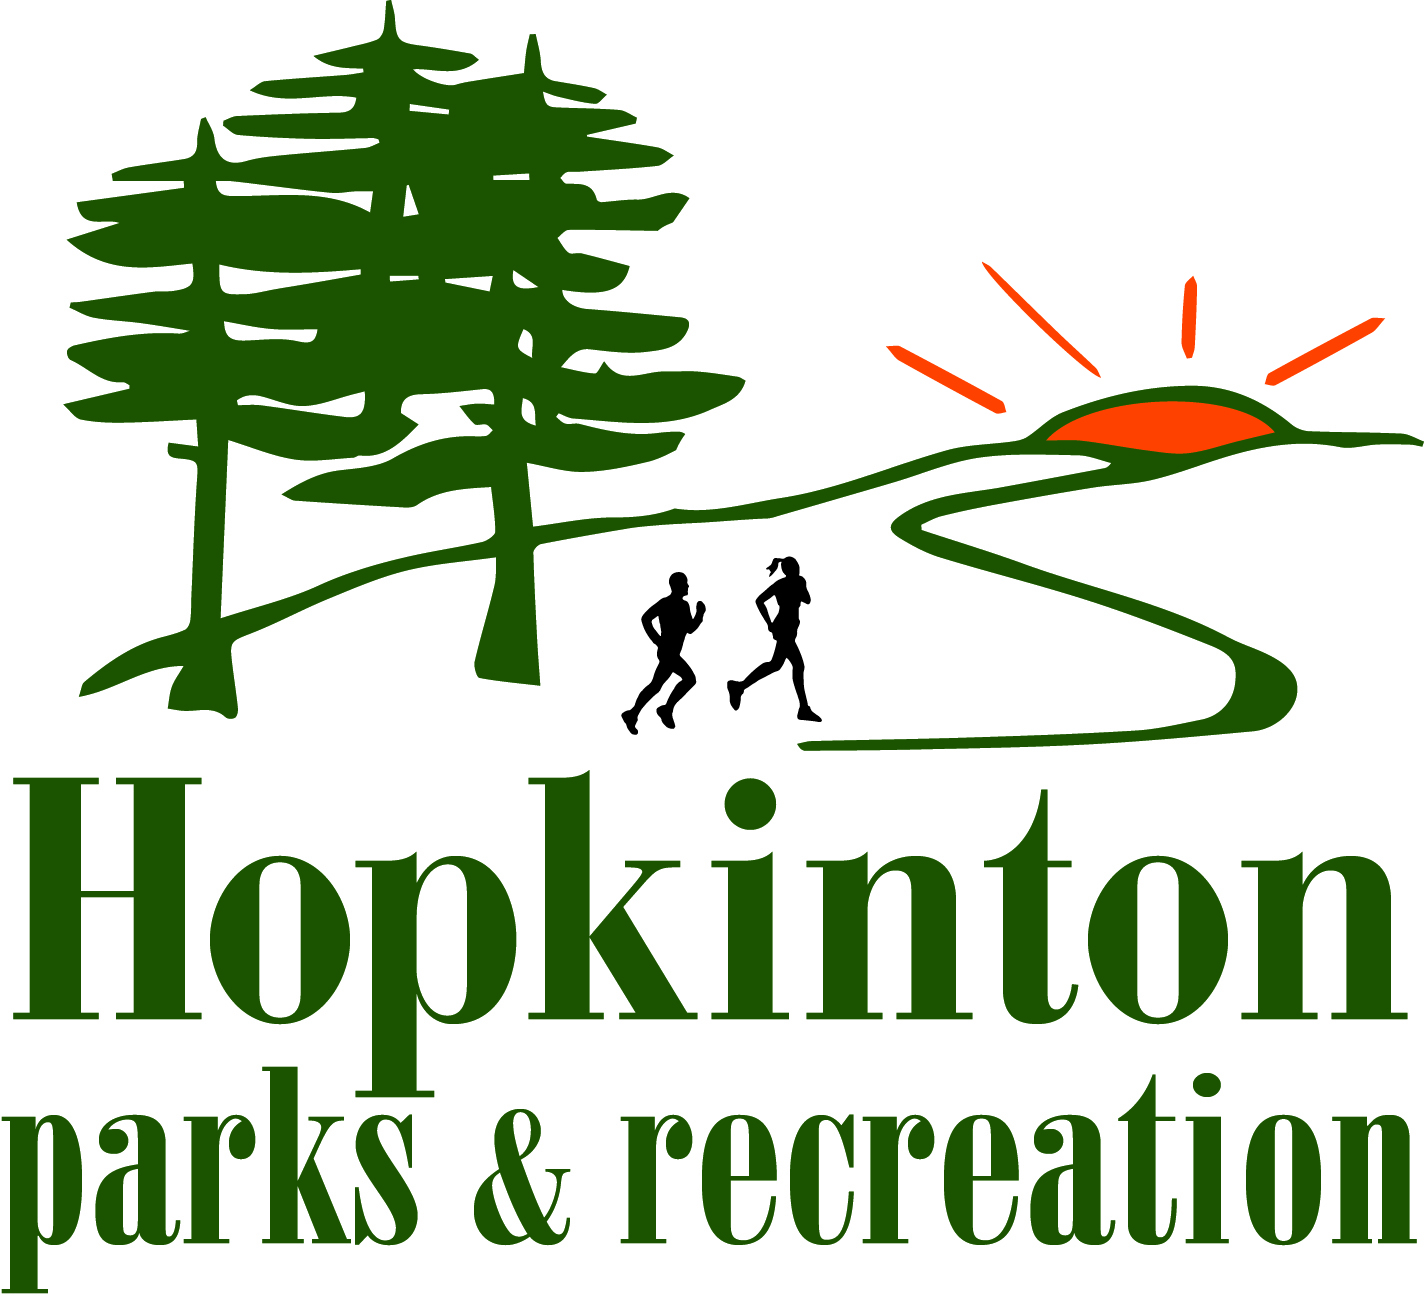 Summer Fun Business Profile: Plan now for ultimate fun experience with Parks & Rec programs